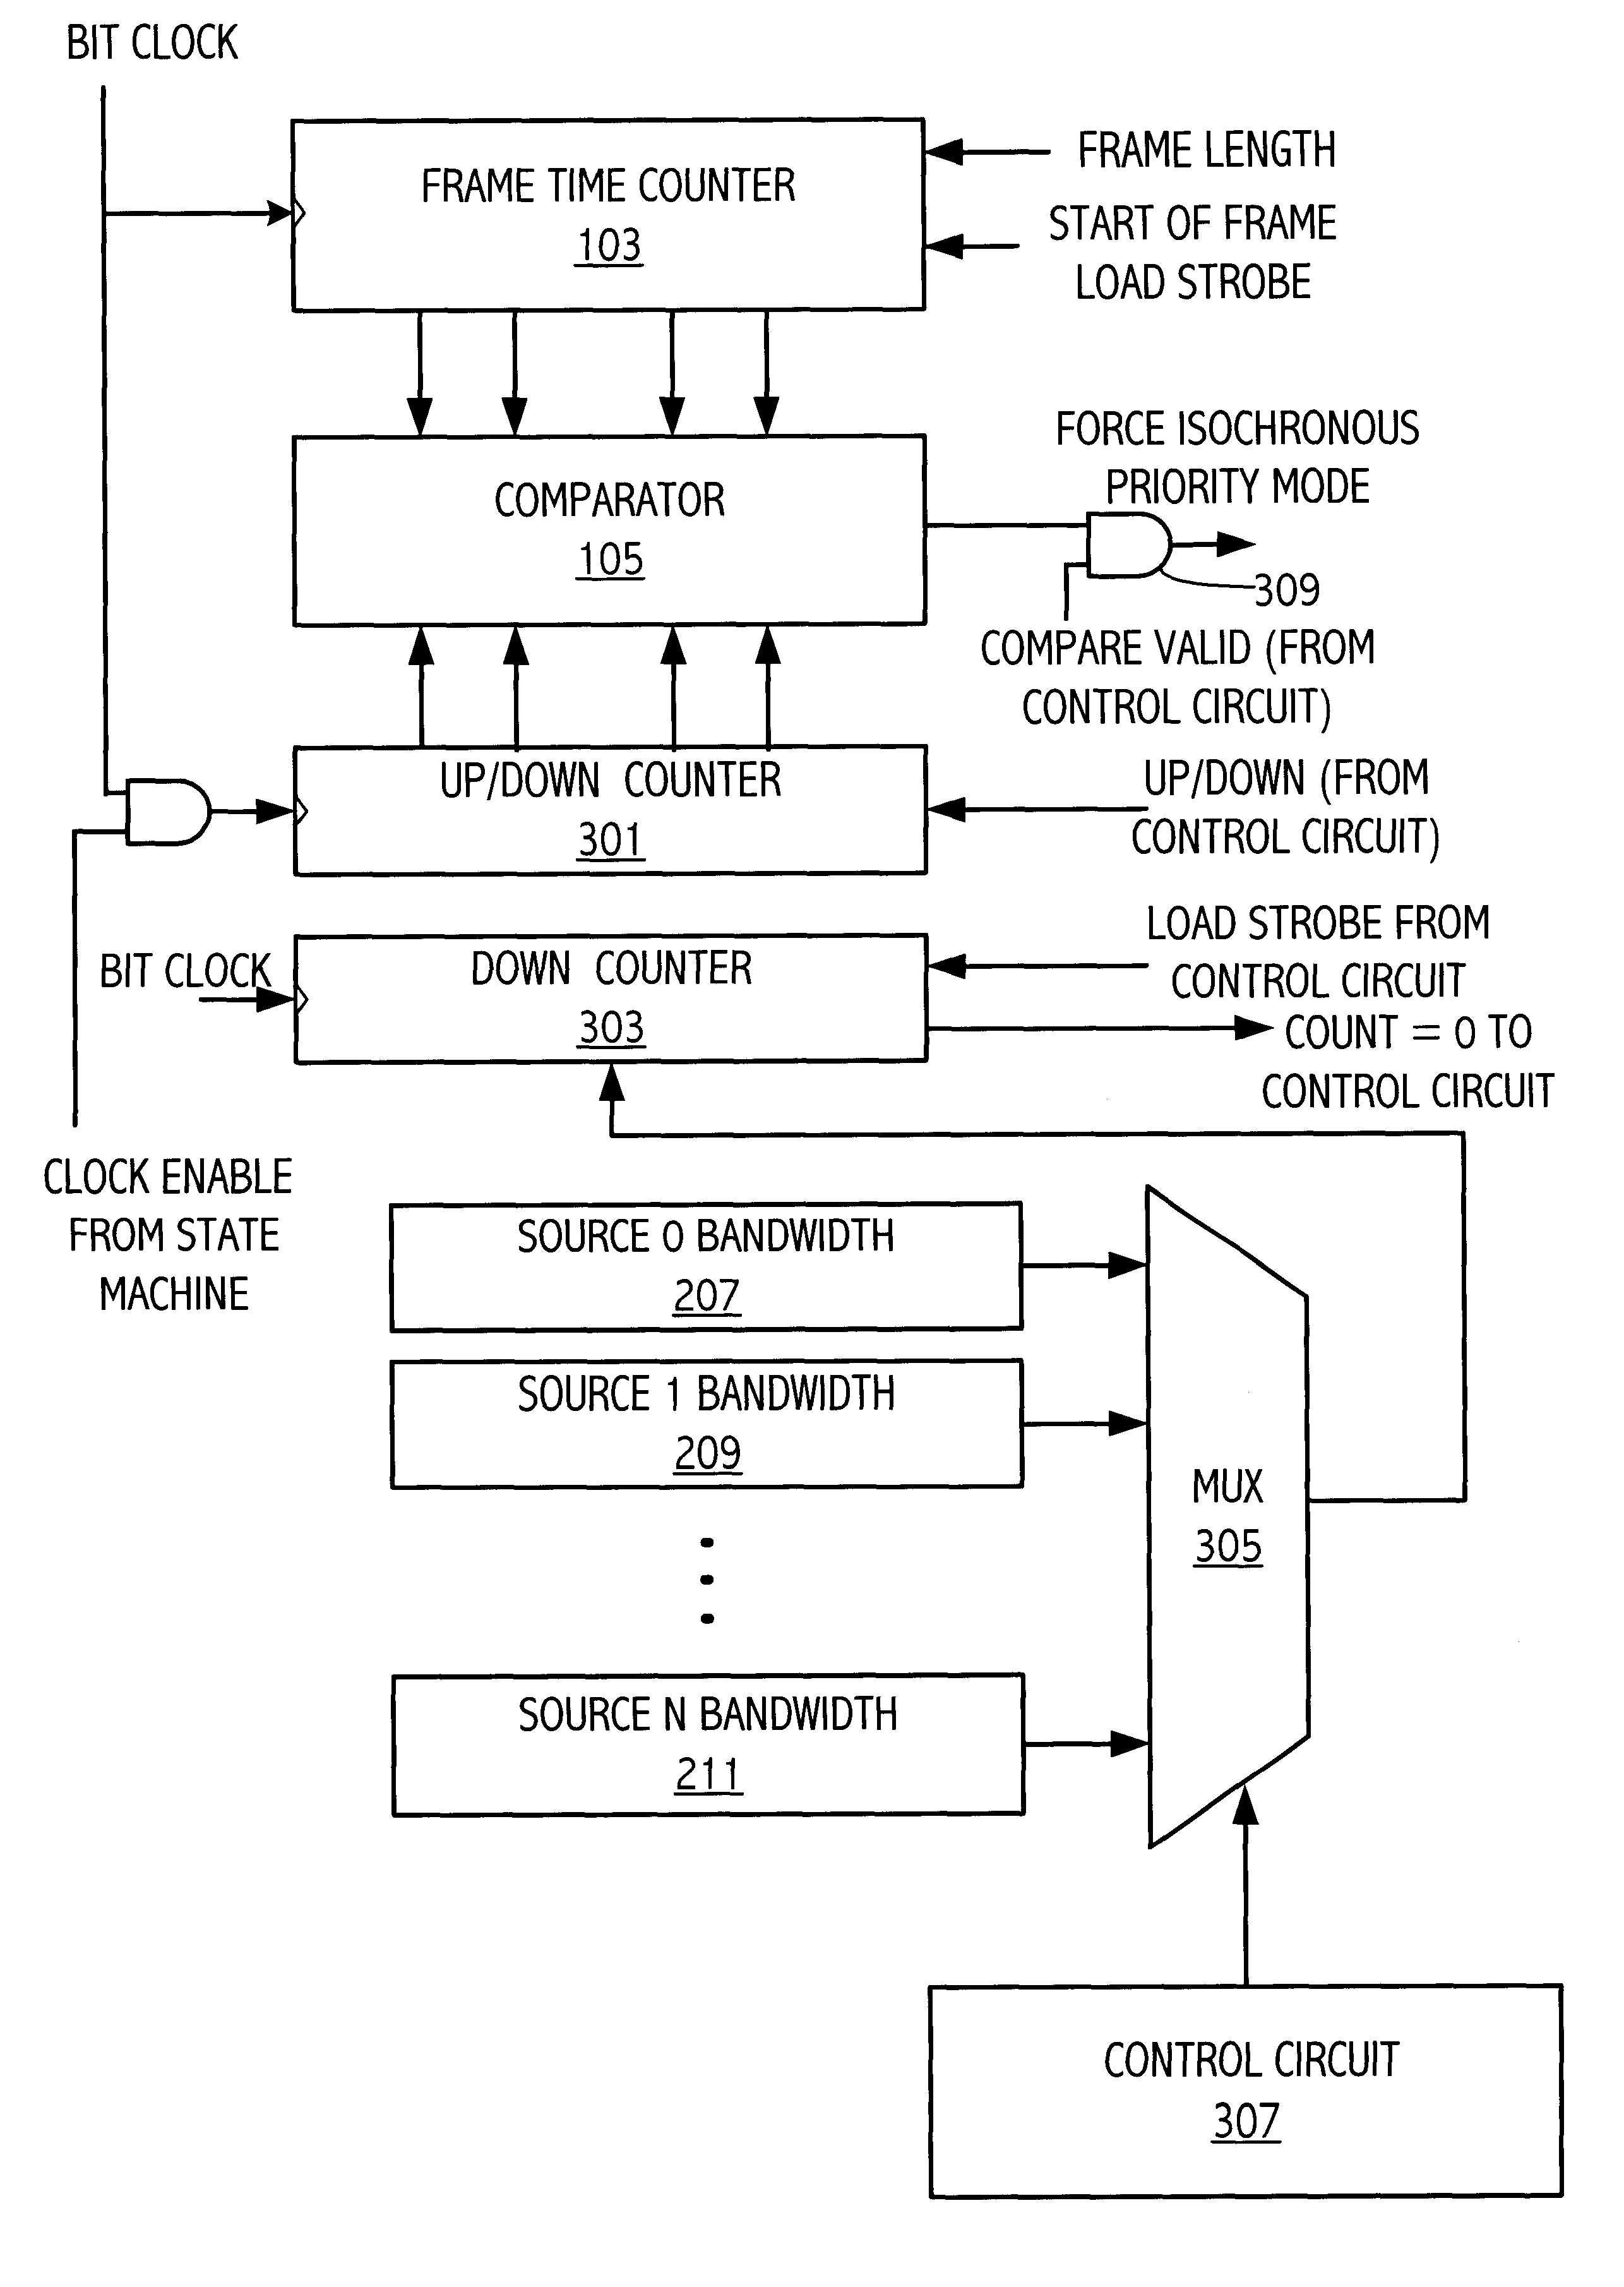 Dynamic scheduling mechanism for an asynchronous/isochronous integrated circuit interconnect bus